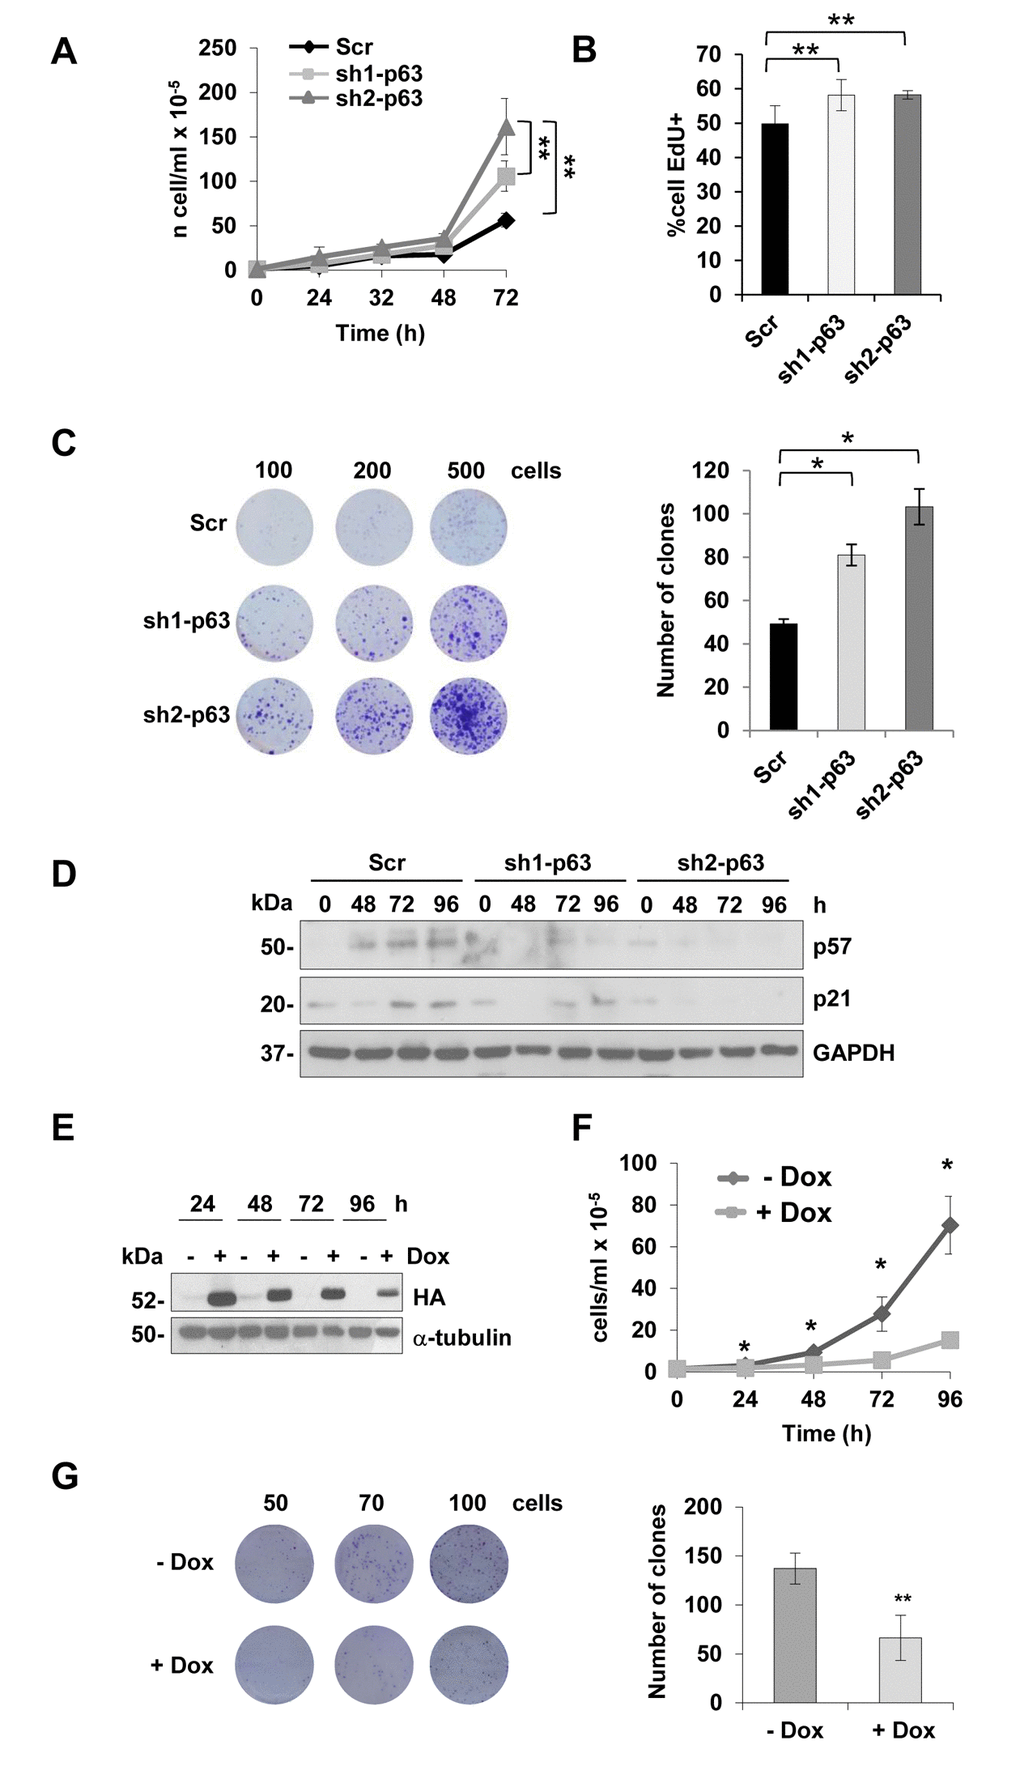 TAp63 knock-down increases myoblast proliferation. (A) Growth curve of C2C7 Scr, sh1- and sh2-p63 clones. One representative experiment of three is shown. (B) EdU-incorporation assay in proliferating C2C7 scramble Scr, sh1- and sh2-p63 clones. Data are shown as mean± S.D. **p(C) Clonogenicity assay of C2C7 Scr, sh1- and sh2-p63 clones. Images of one experiment of three are shown. Colony number count/dish is reported in the histogram (right). *pD) Western blot confirming reduced expression of p21 and p57 in sh1- and sh2-p63. One representative experiment of three is shown. (E) Western blot analysis of C2C12 upon doxycyclin treatments (Tet-ON, Dox). Tubulin is shown as loading control. One representative experiment of three is shown. (F) Growth curve of Tet-ON TAp63γ C2C12 cells after 24, 48, 72 and 96h of Dox (2µg/ml) induction. (G) Clonogenicity assay of Tet-ON TAp63γ C2C12 cells after 6 days doxycycline (2µg/ml) induction. Colony number count/dish is reported in the histogram (right). Data are shown as mean ± S.D. of three independent experiments. *p